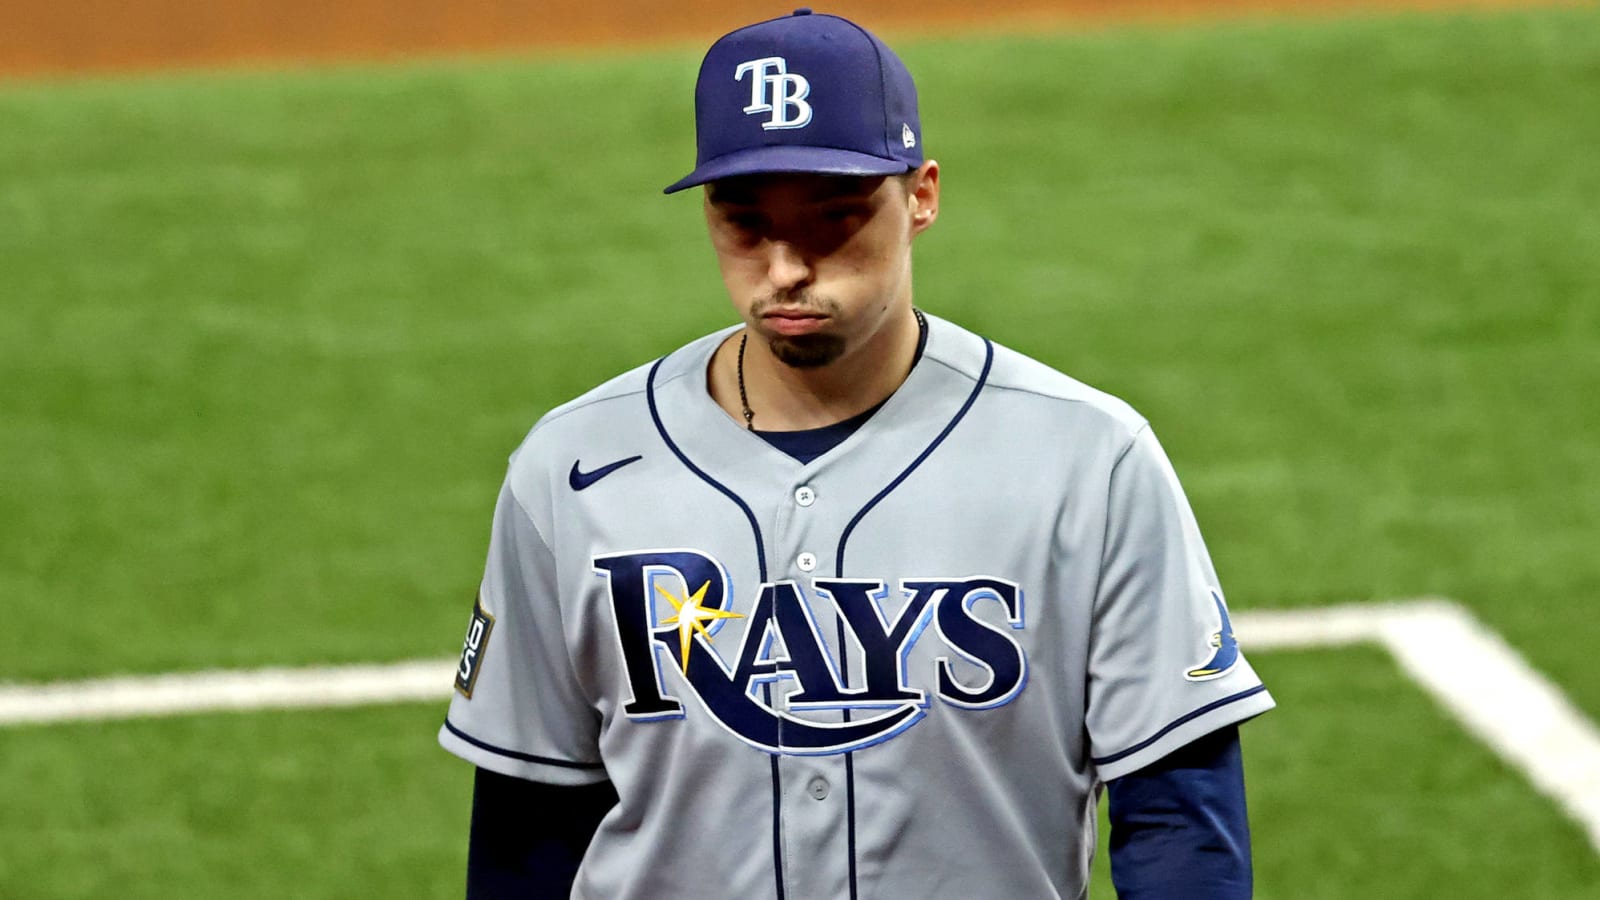 A-Rod roasts ‘Ivy Leaguers’ over Rays pulling Snell